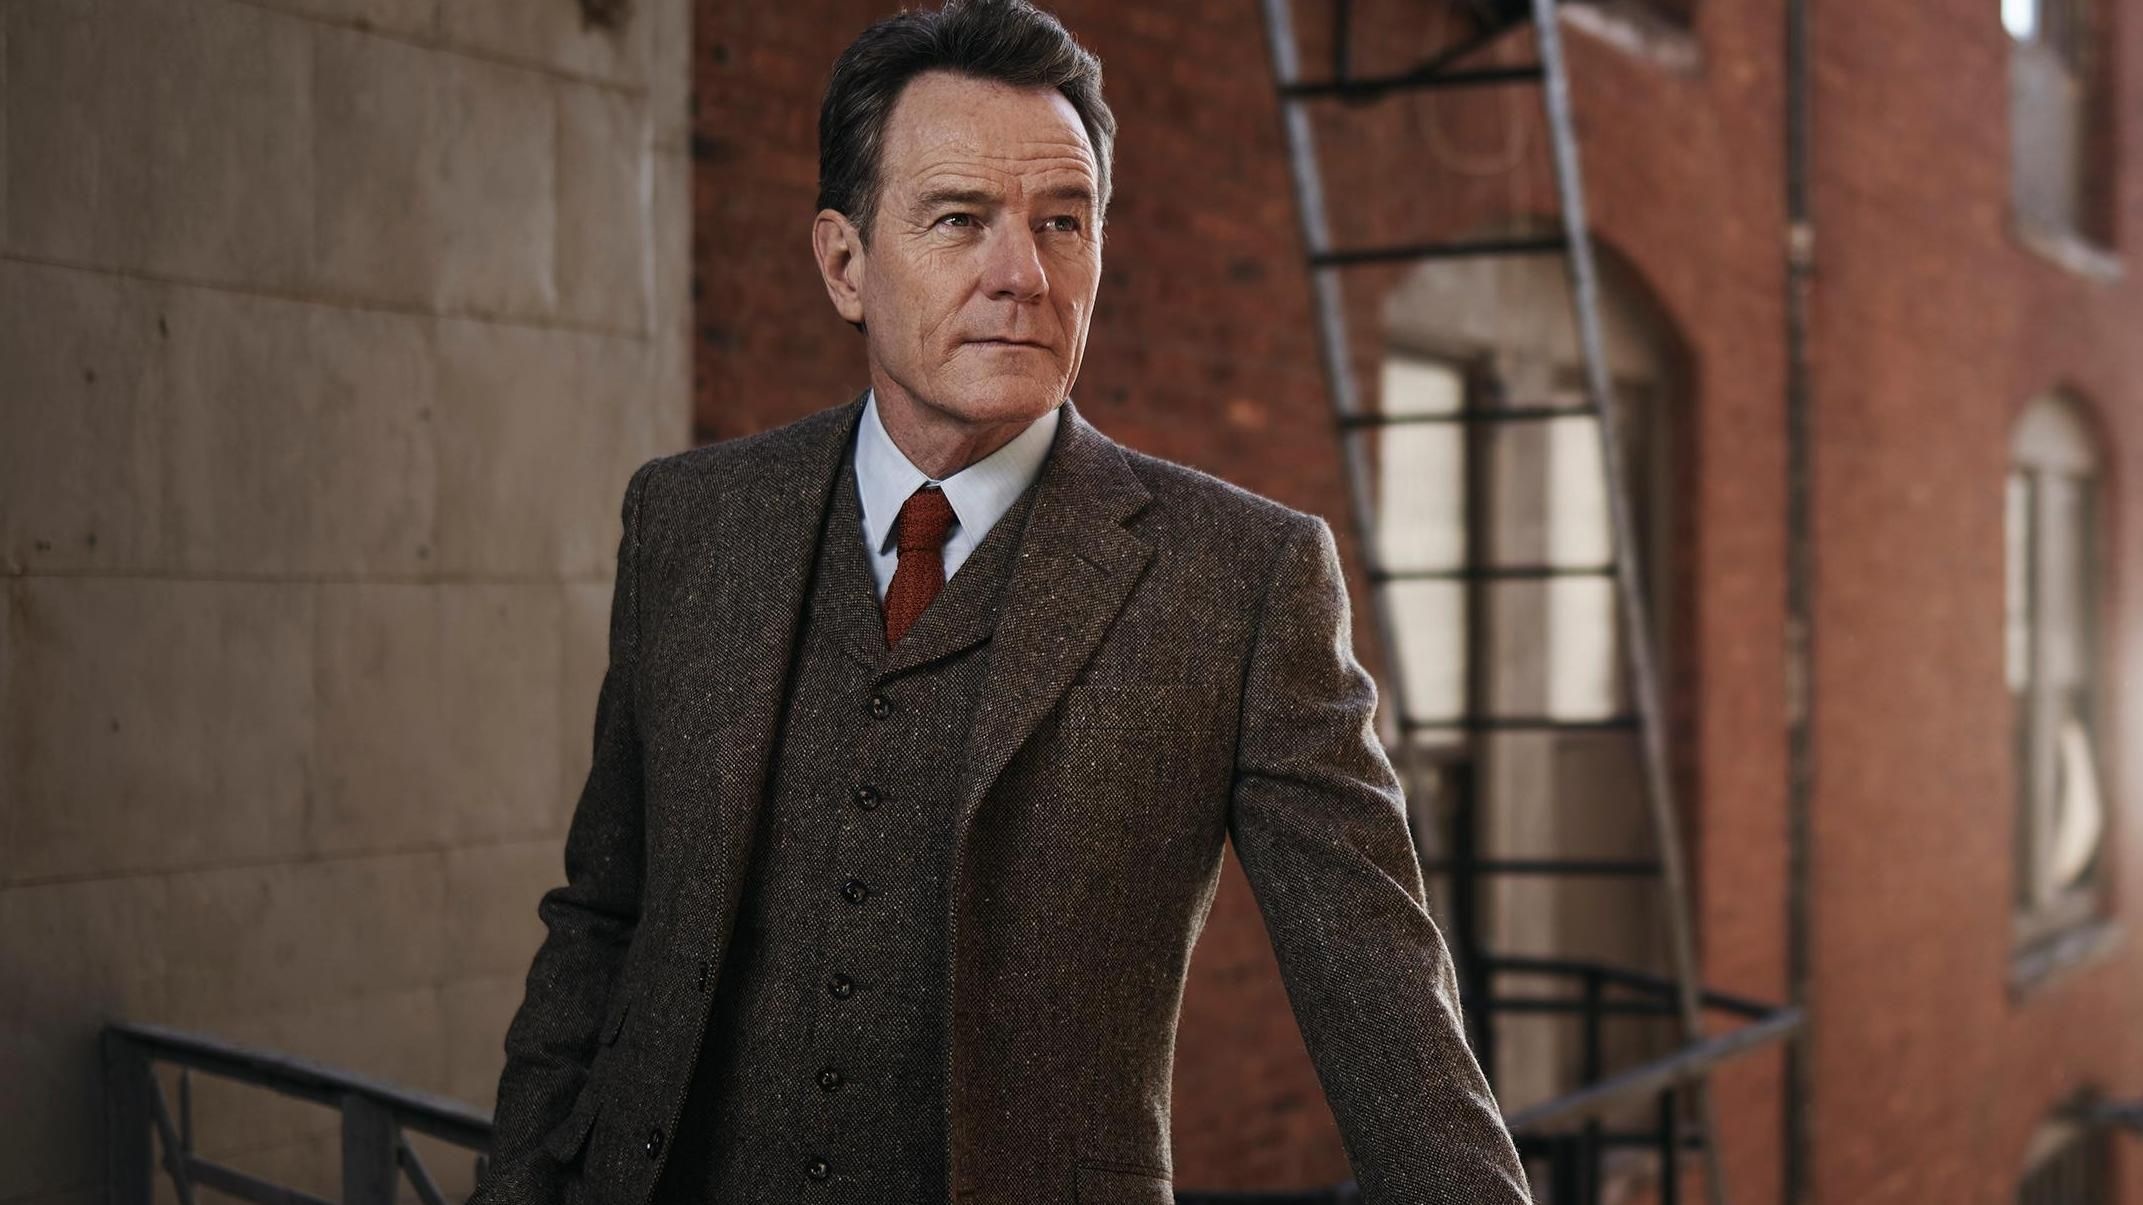 Bryan Cranston: Played U.S. president Lyndon B. Johnson in the American Repertory Theater and Broadway productions of All the Way. 2150x1210 HD Wallpaper.